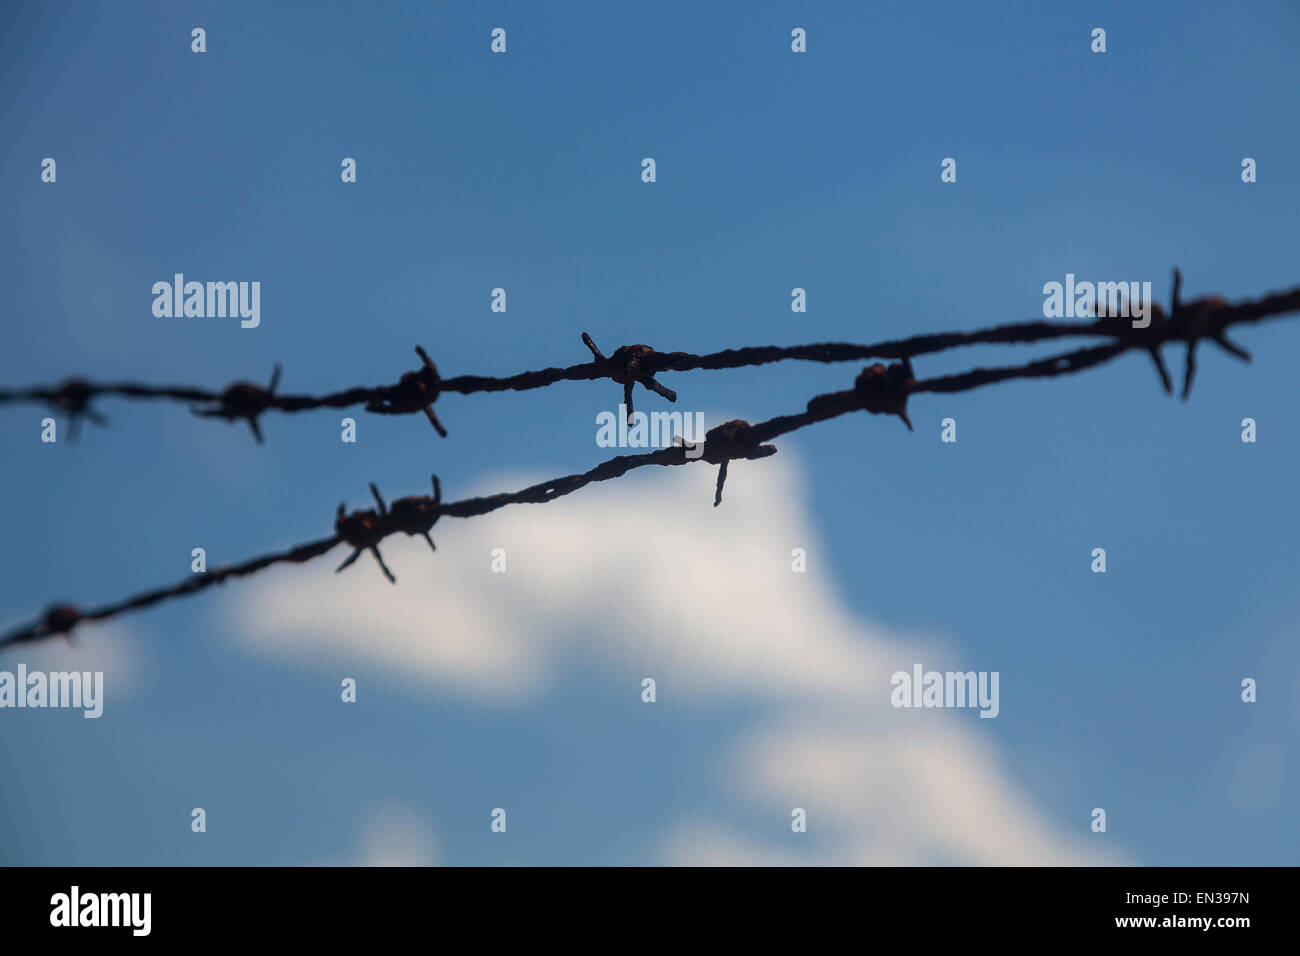 Barbed wire against blue sky, Germany Stock Photo